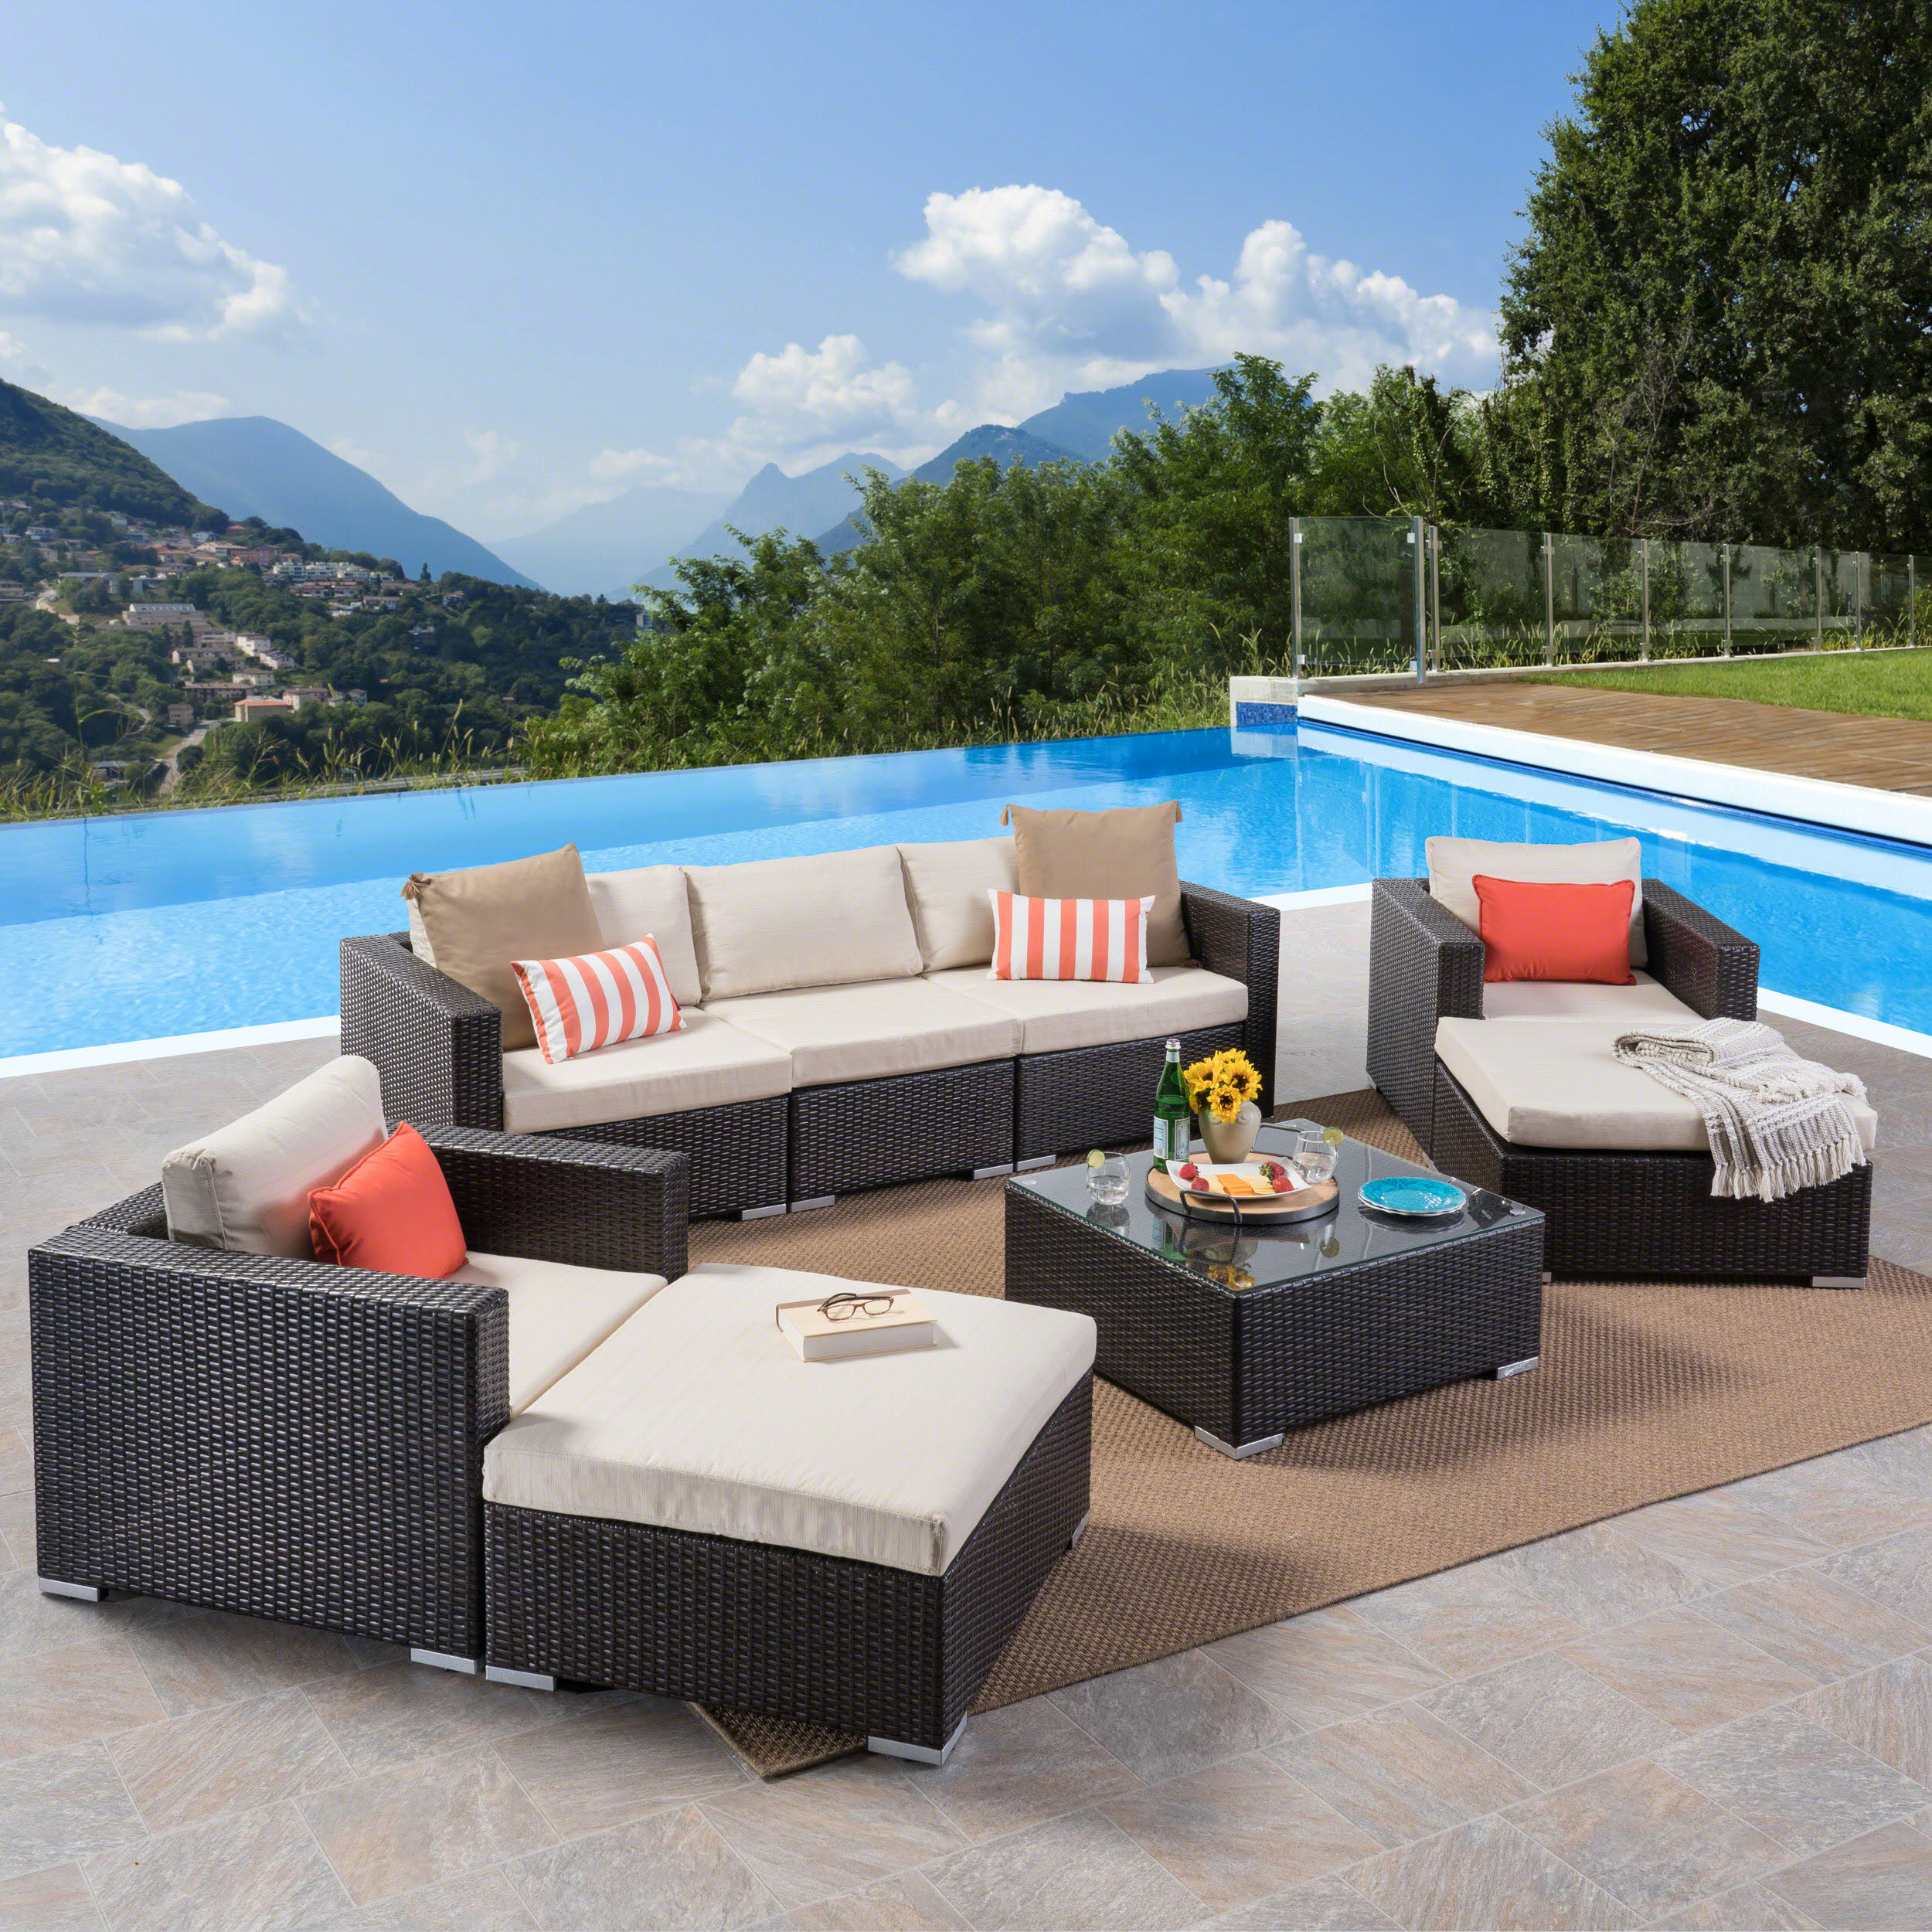 Faviola Outdoor 5 Seater Wicker Chat Set with Aluminum Frame and Cushions, Multibrown, Beige - image 1 of 11